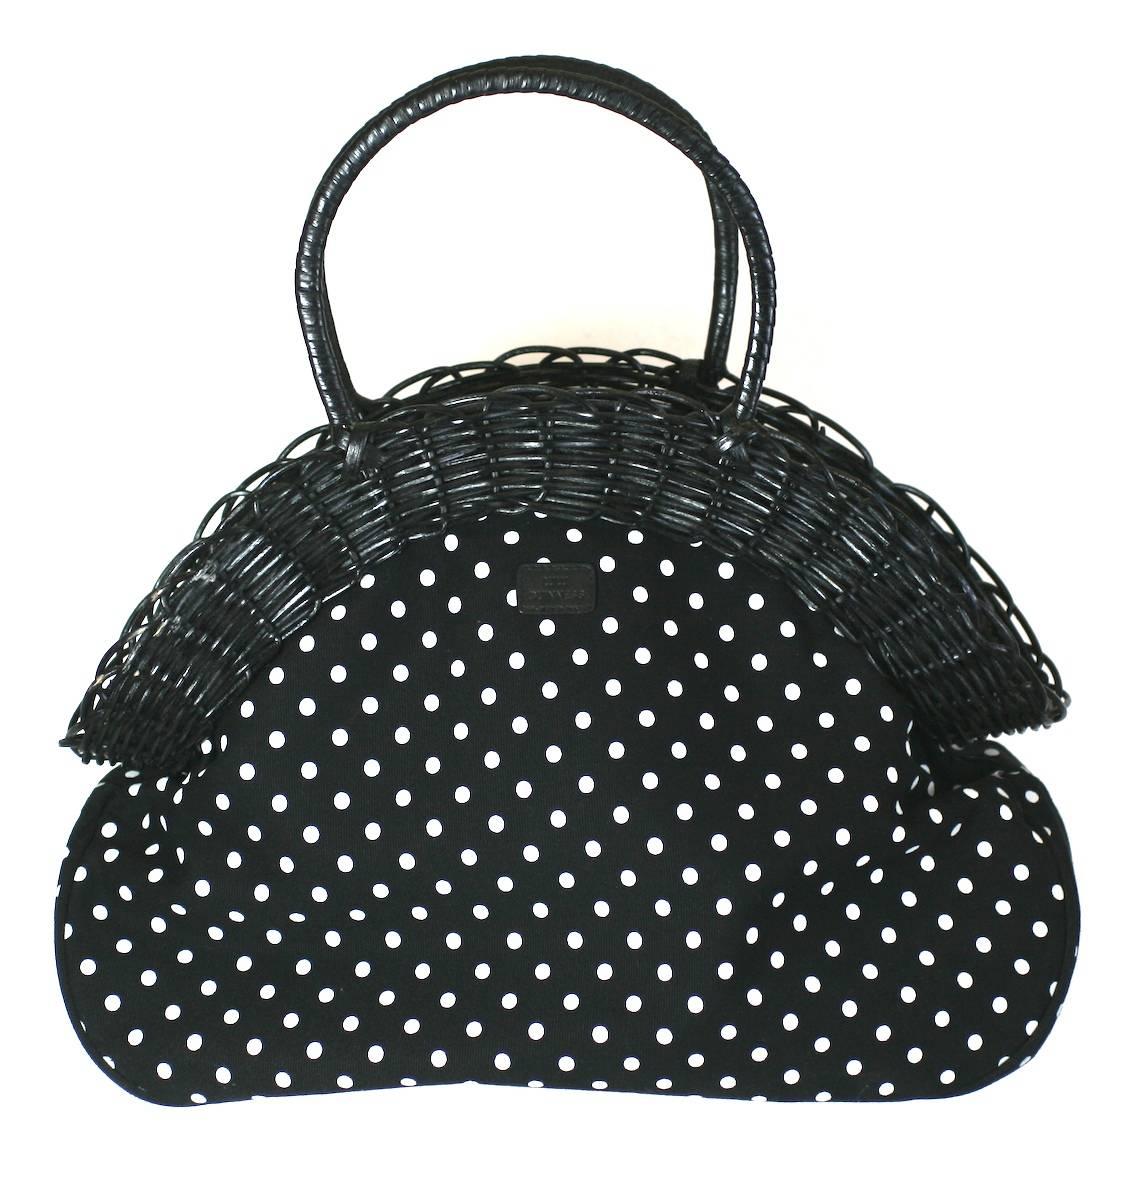 Lulu Guinness Wicker Framed, Lemon decorated bag on a polka dot canvas base. Whimsical charming design as to be expected from Lulu Guinness.
A wide wicker frame and handles hide a central zip compartment with more pockets inside.
16" wide x